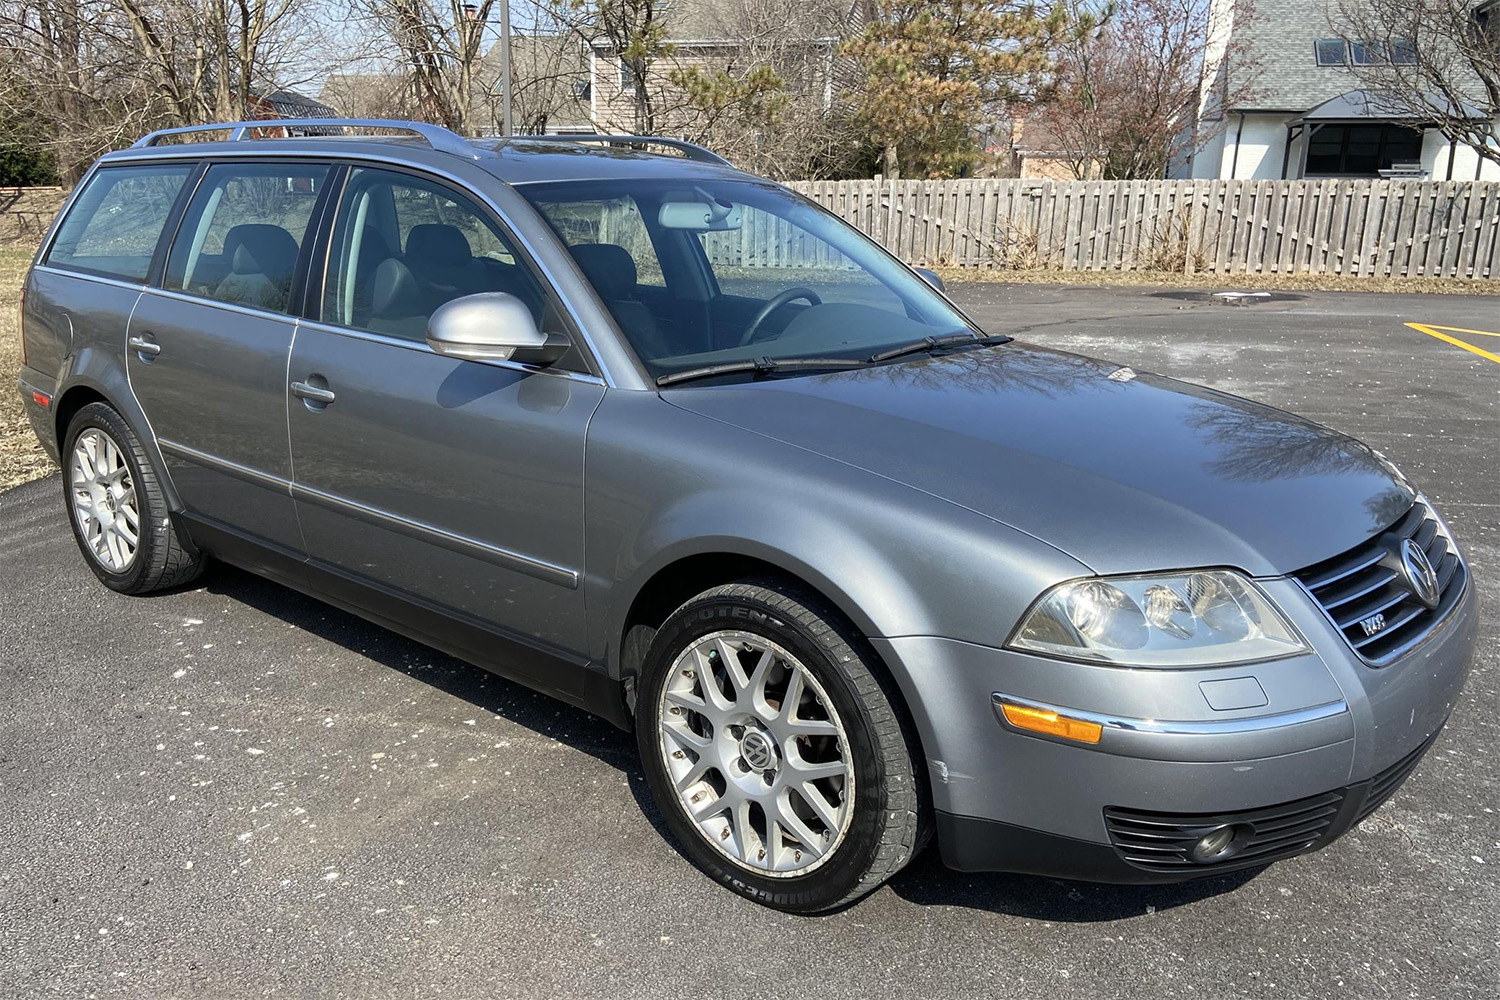 2004 Volkswagen Passat Silver Station Wagon with W8 engine and Six-speed manual transmission on Cars and Bids